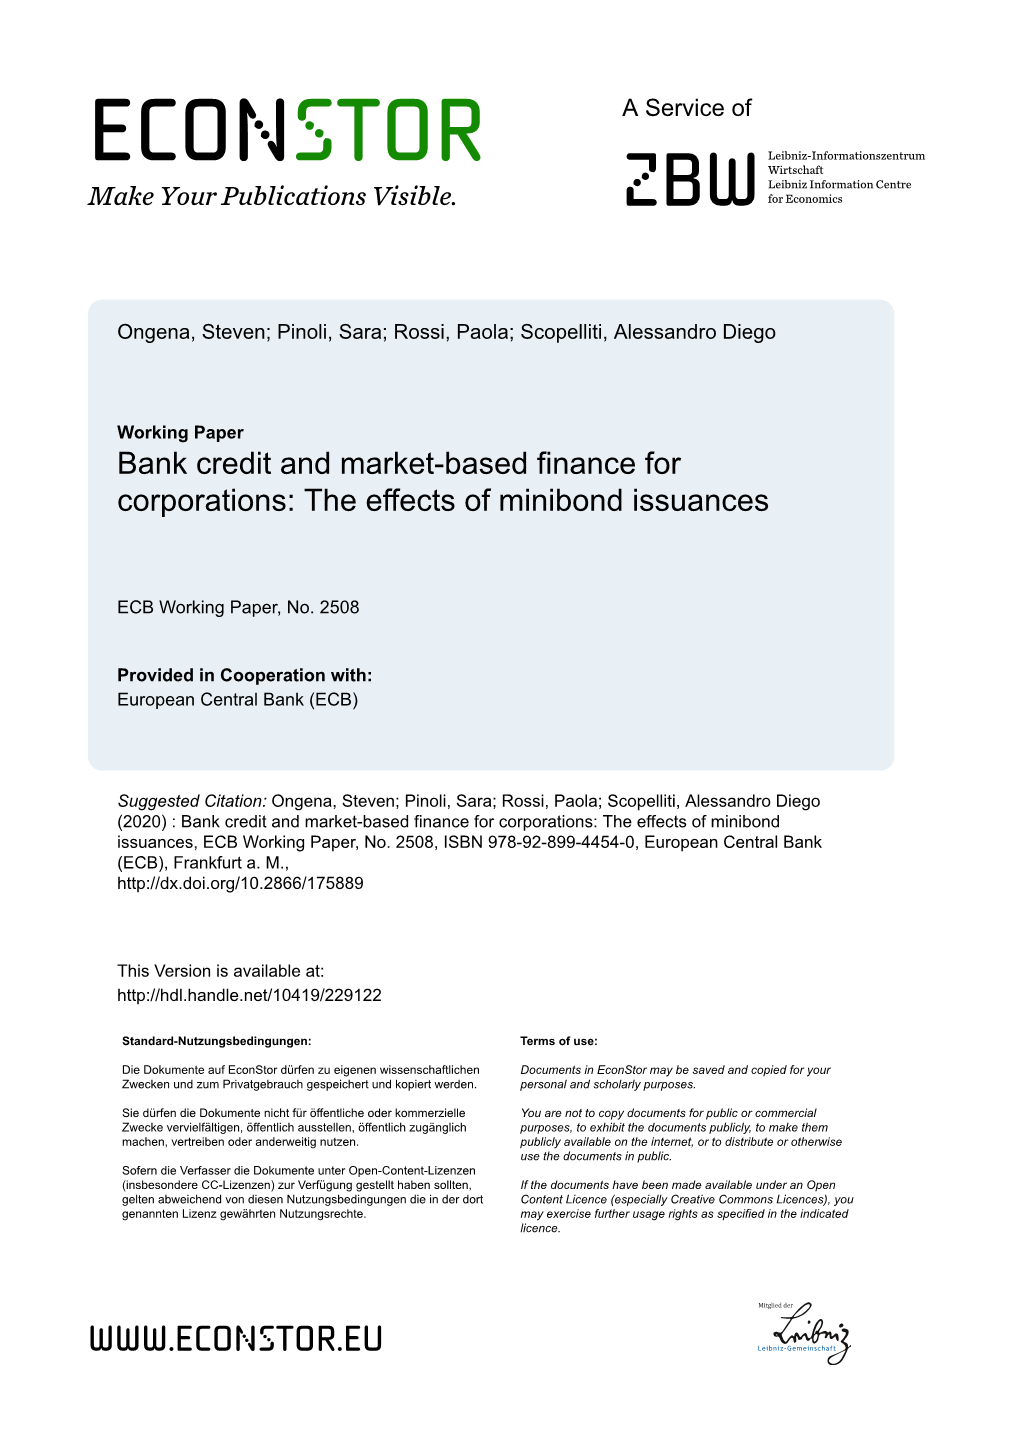 Bank Credit and Market-Based Finance for Corporations: the Effects of Minibond Issuances